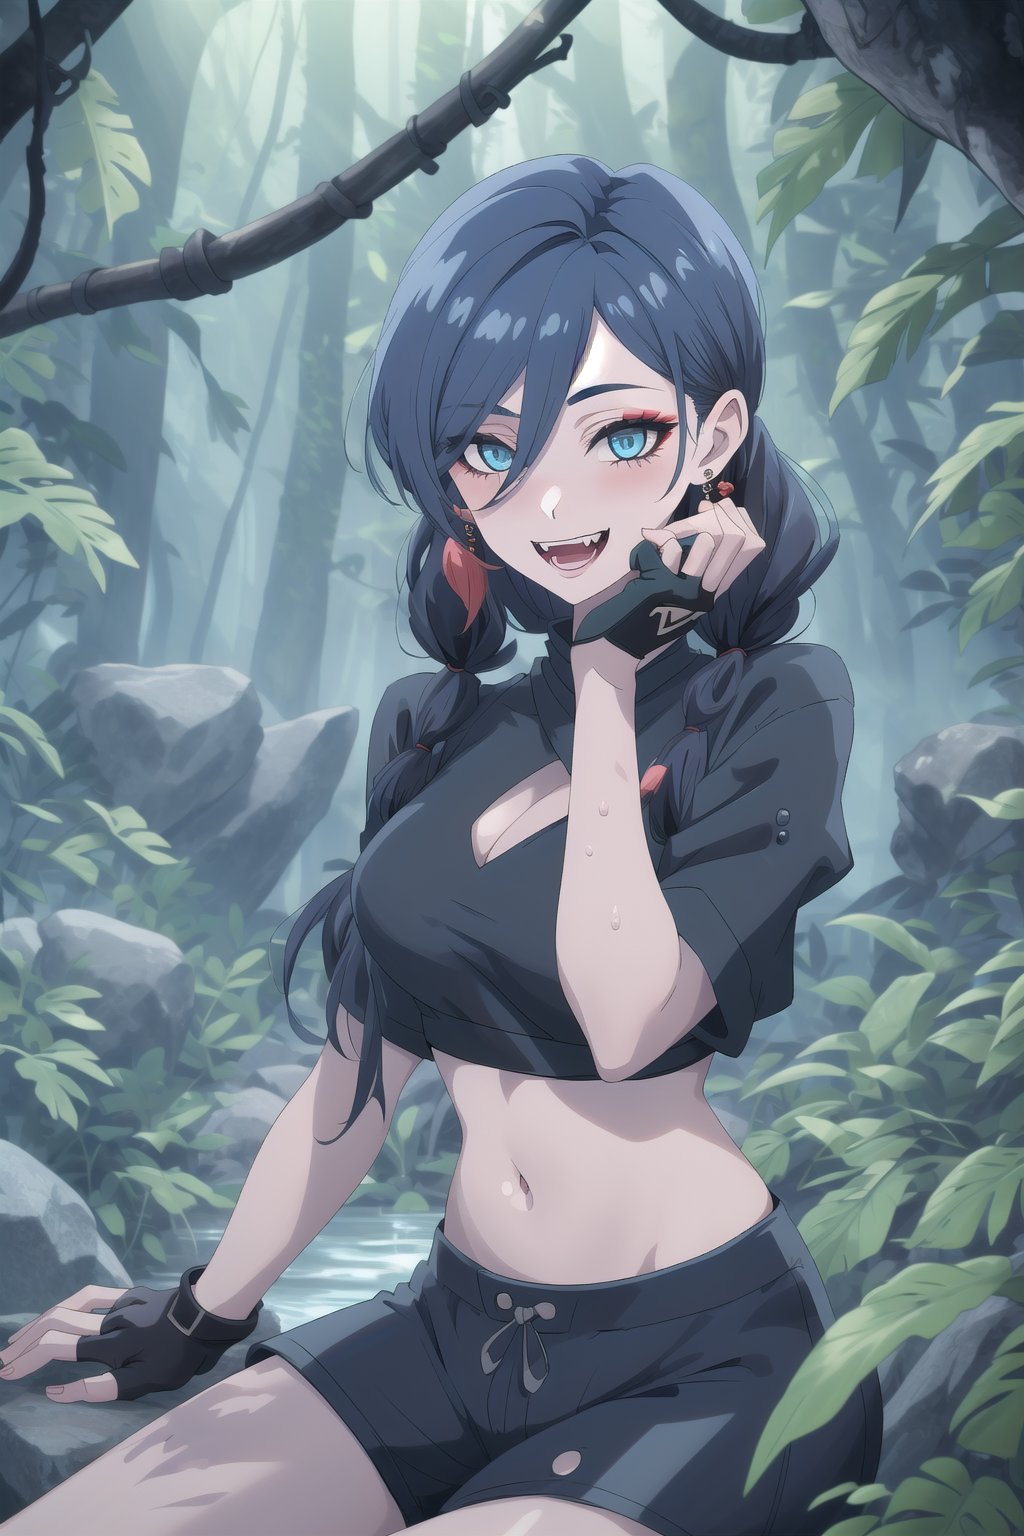 nier anime style illustration, best quality, masterpiece High resolution, good detail, bright colors, HDR, 4K. Dolby vision high. 

Girl with long straight black hair, long twin pigtails (hair covering one eye), blue eyes, blushing, blue earrings 

Stylish Cyberpunk Black Crop Top 

Showing navel, exposed navel 

Elegant cyberpunk black shorts

Barefoot

Inside an underground cave 

Blue illumination in the depth of underground water 

Sitting on a rock 

Black Stylish Fingerless Cyberpunk Gloves

Blue natural lighting

Flirty smile (yandere smile). Happy, excited. Open mouth 

Showing fangs, exposed fangs

jirai kei makeup

jirai kei makeup

Black hair

Inside an underground cave

Showing fangs, exposed fangs

In a lush forest

(A hand on one's own face)
